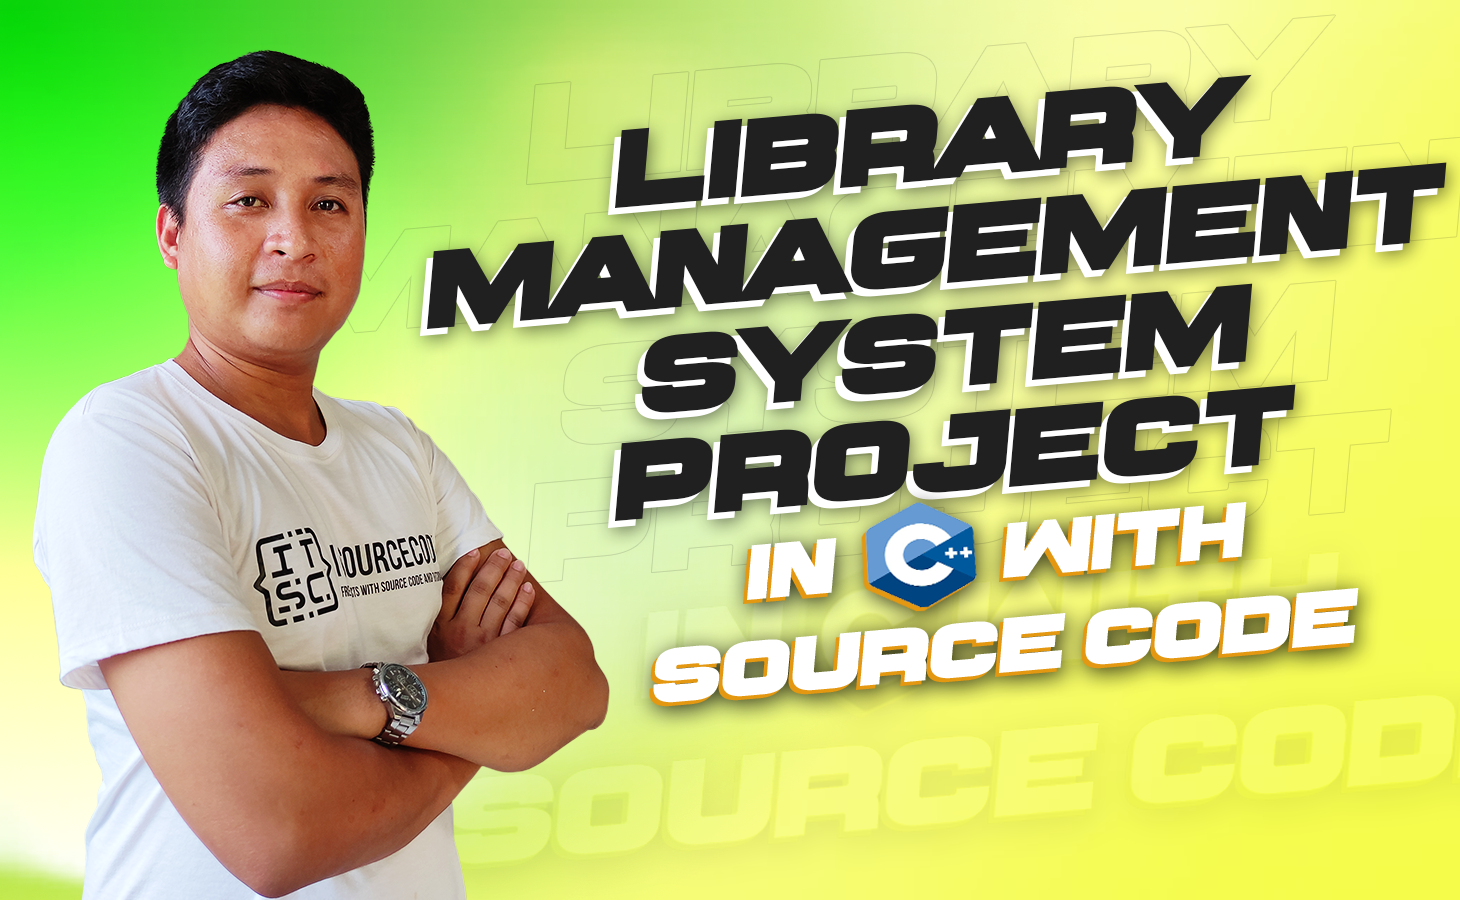 Library Management System Project in C++ with Source Code